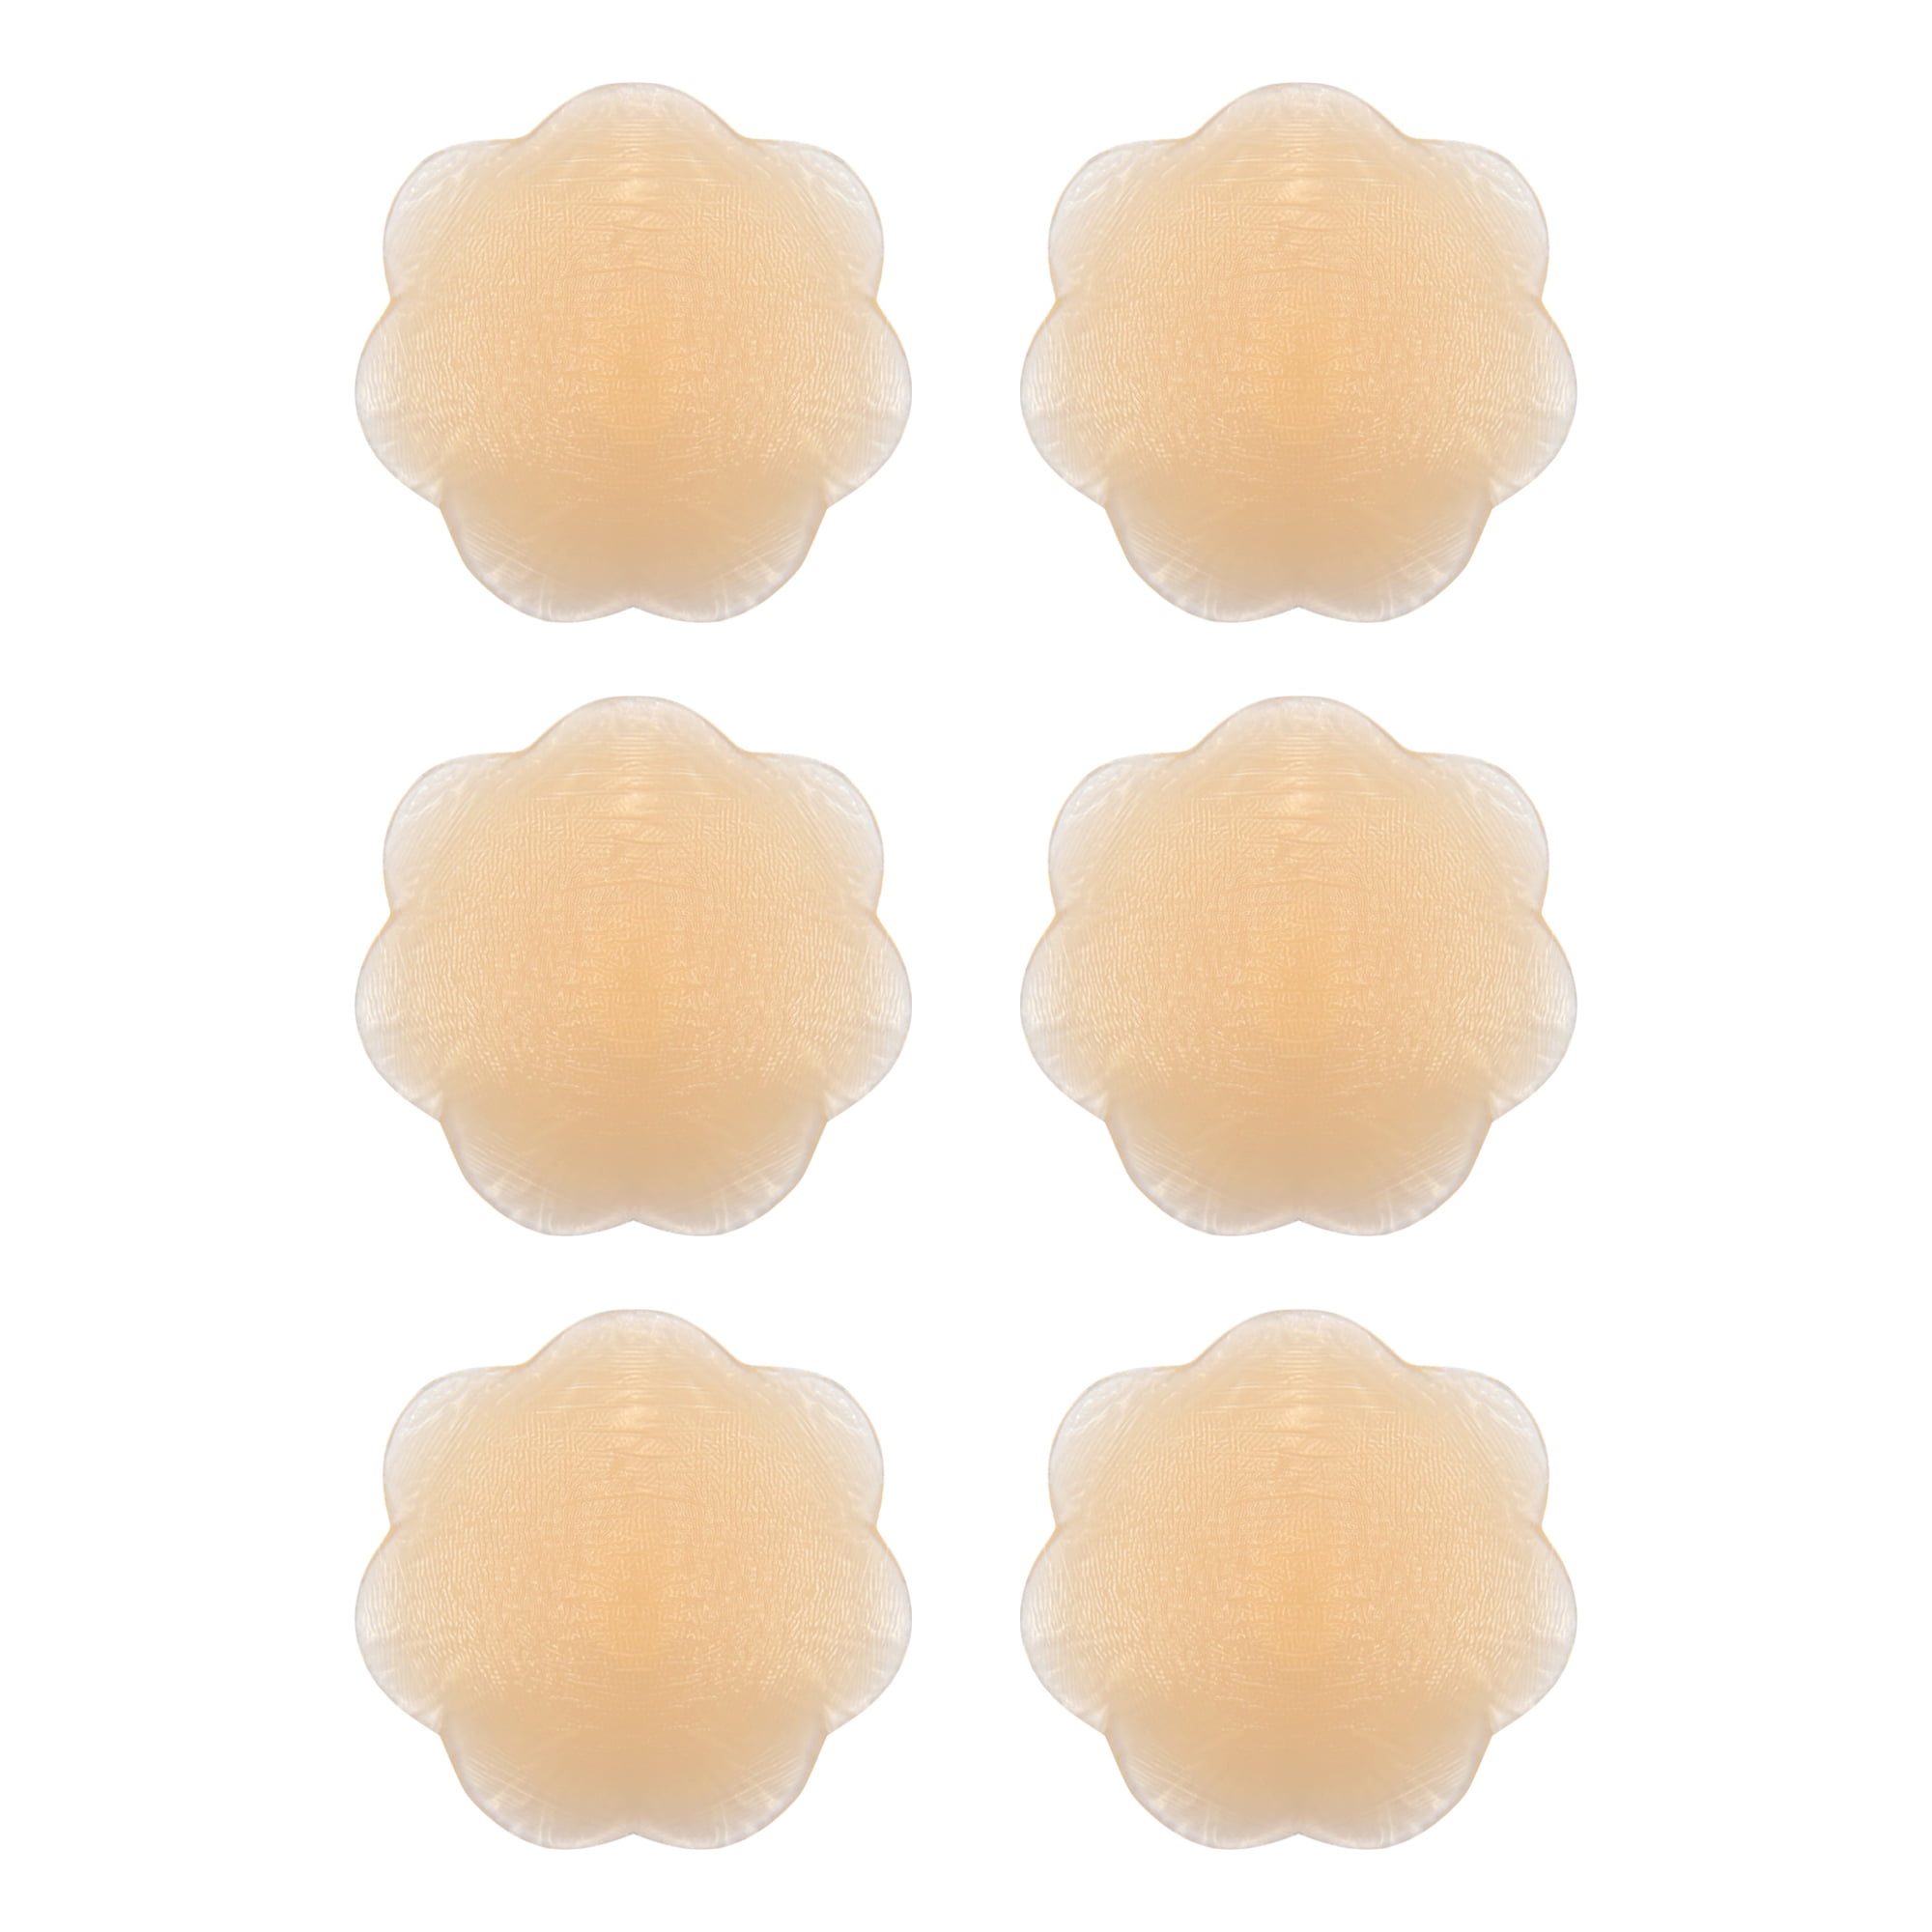 Wingslove 10 Pairs Invisible Nipple Covers Adhesive Bra Disposable Breast Petal Pads Patches 